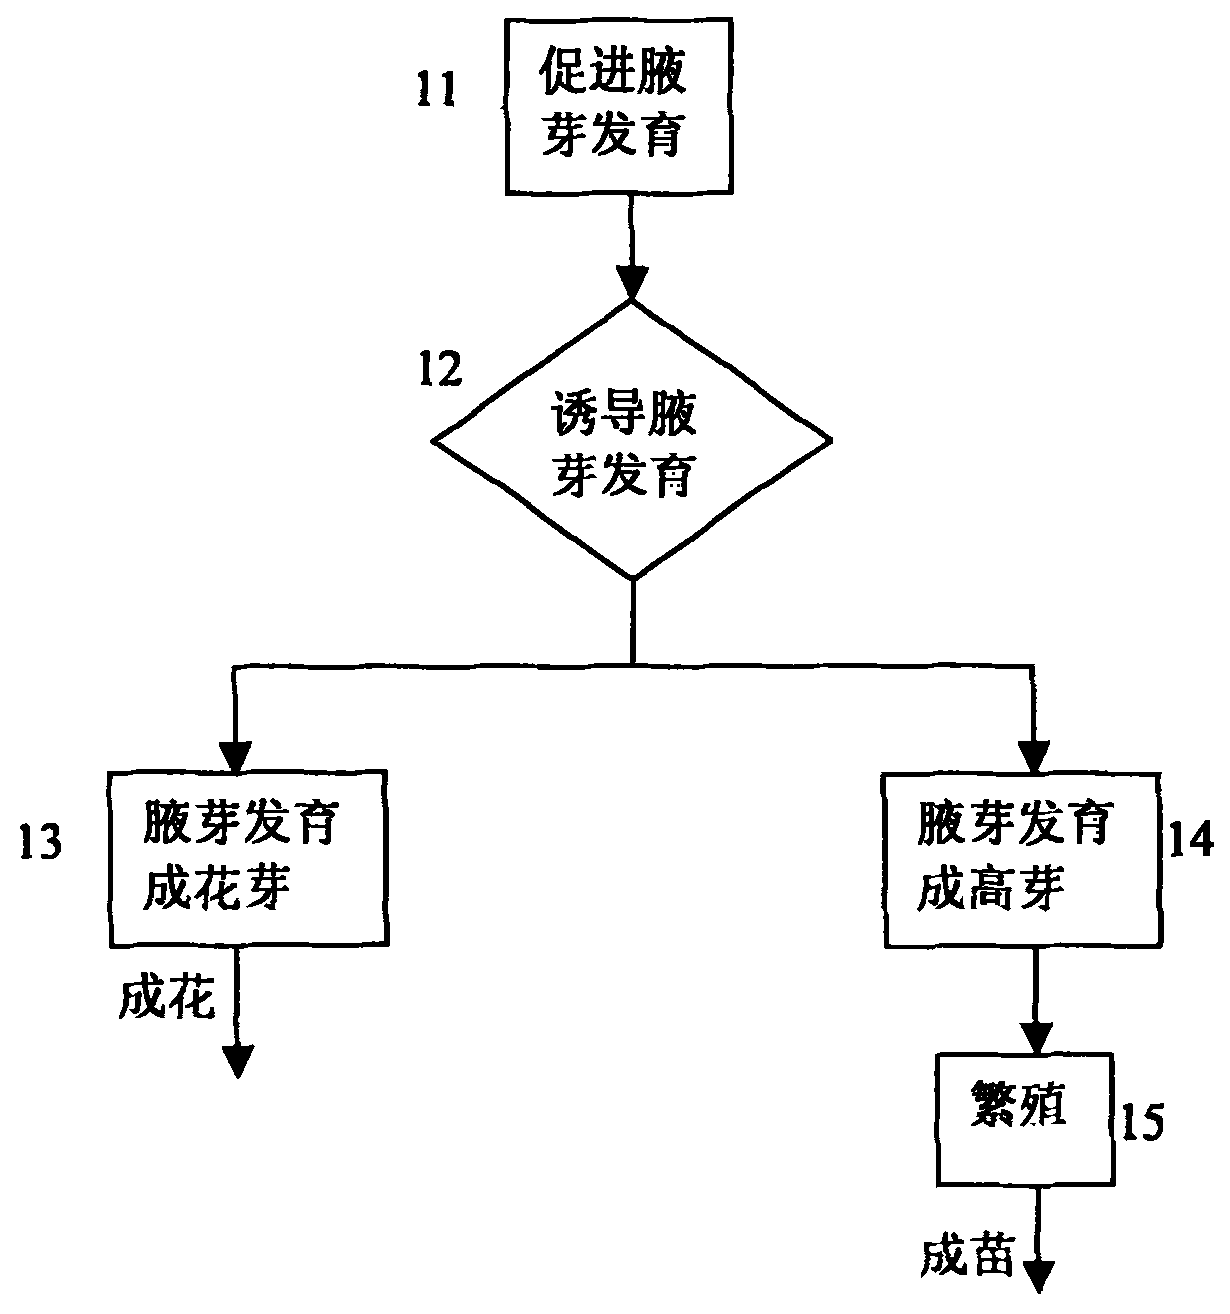 Method for controlling flowering and propagation of dendrobium nobile